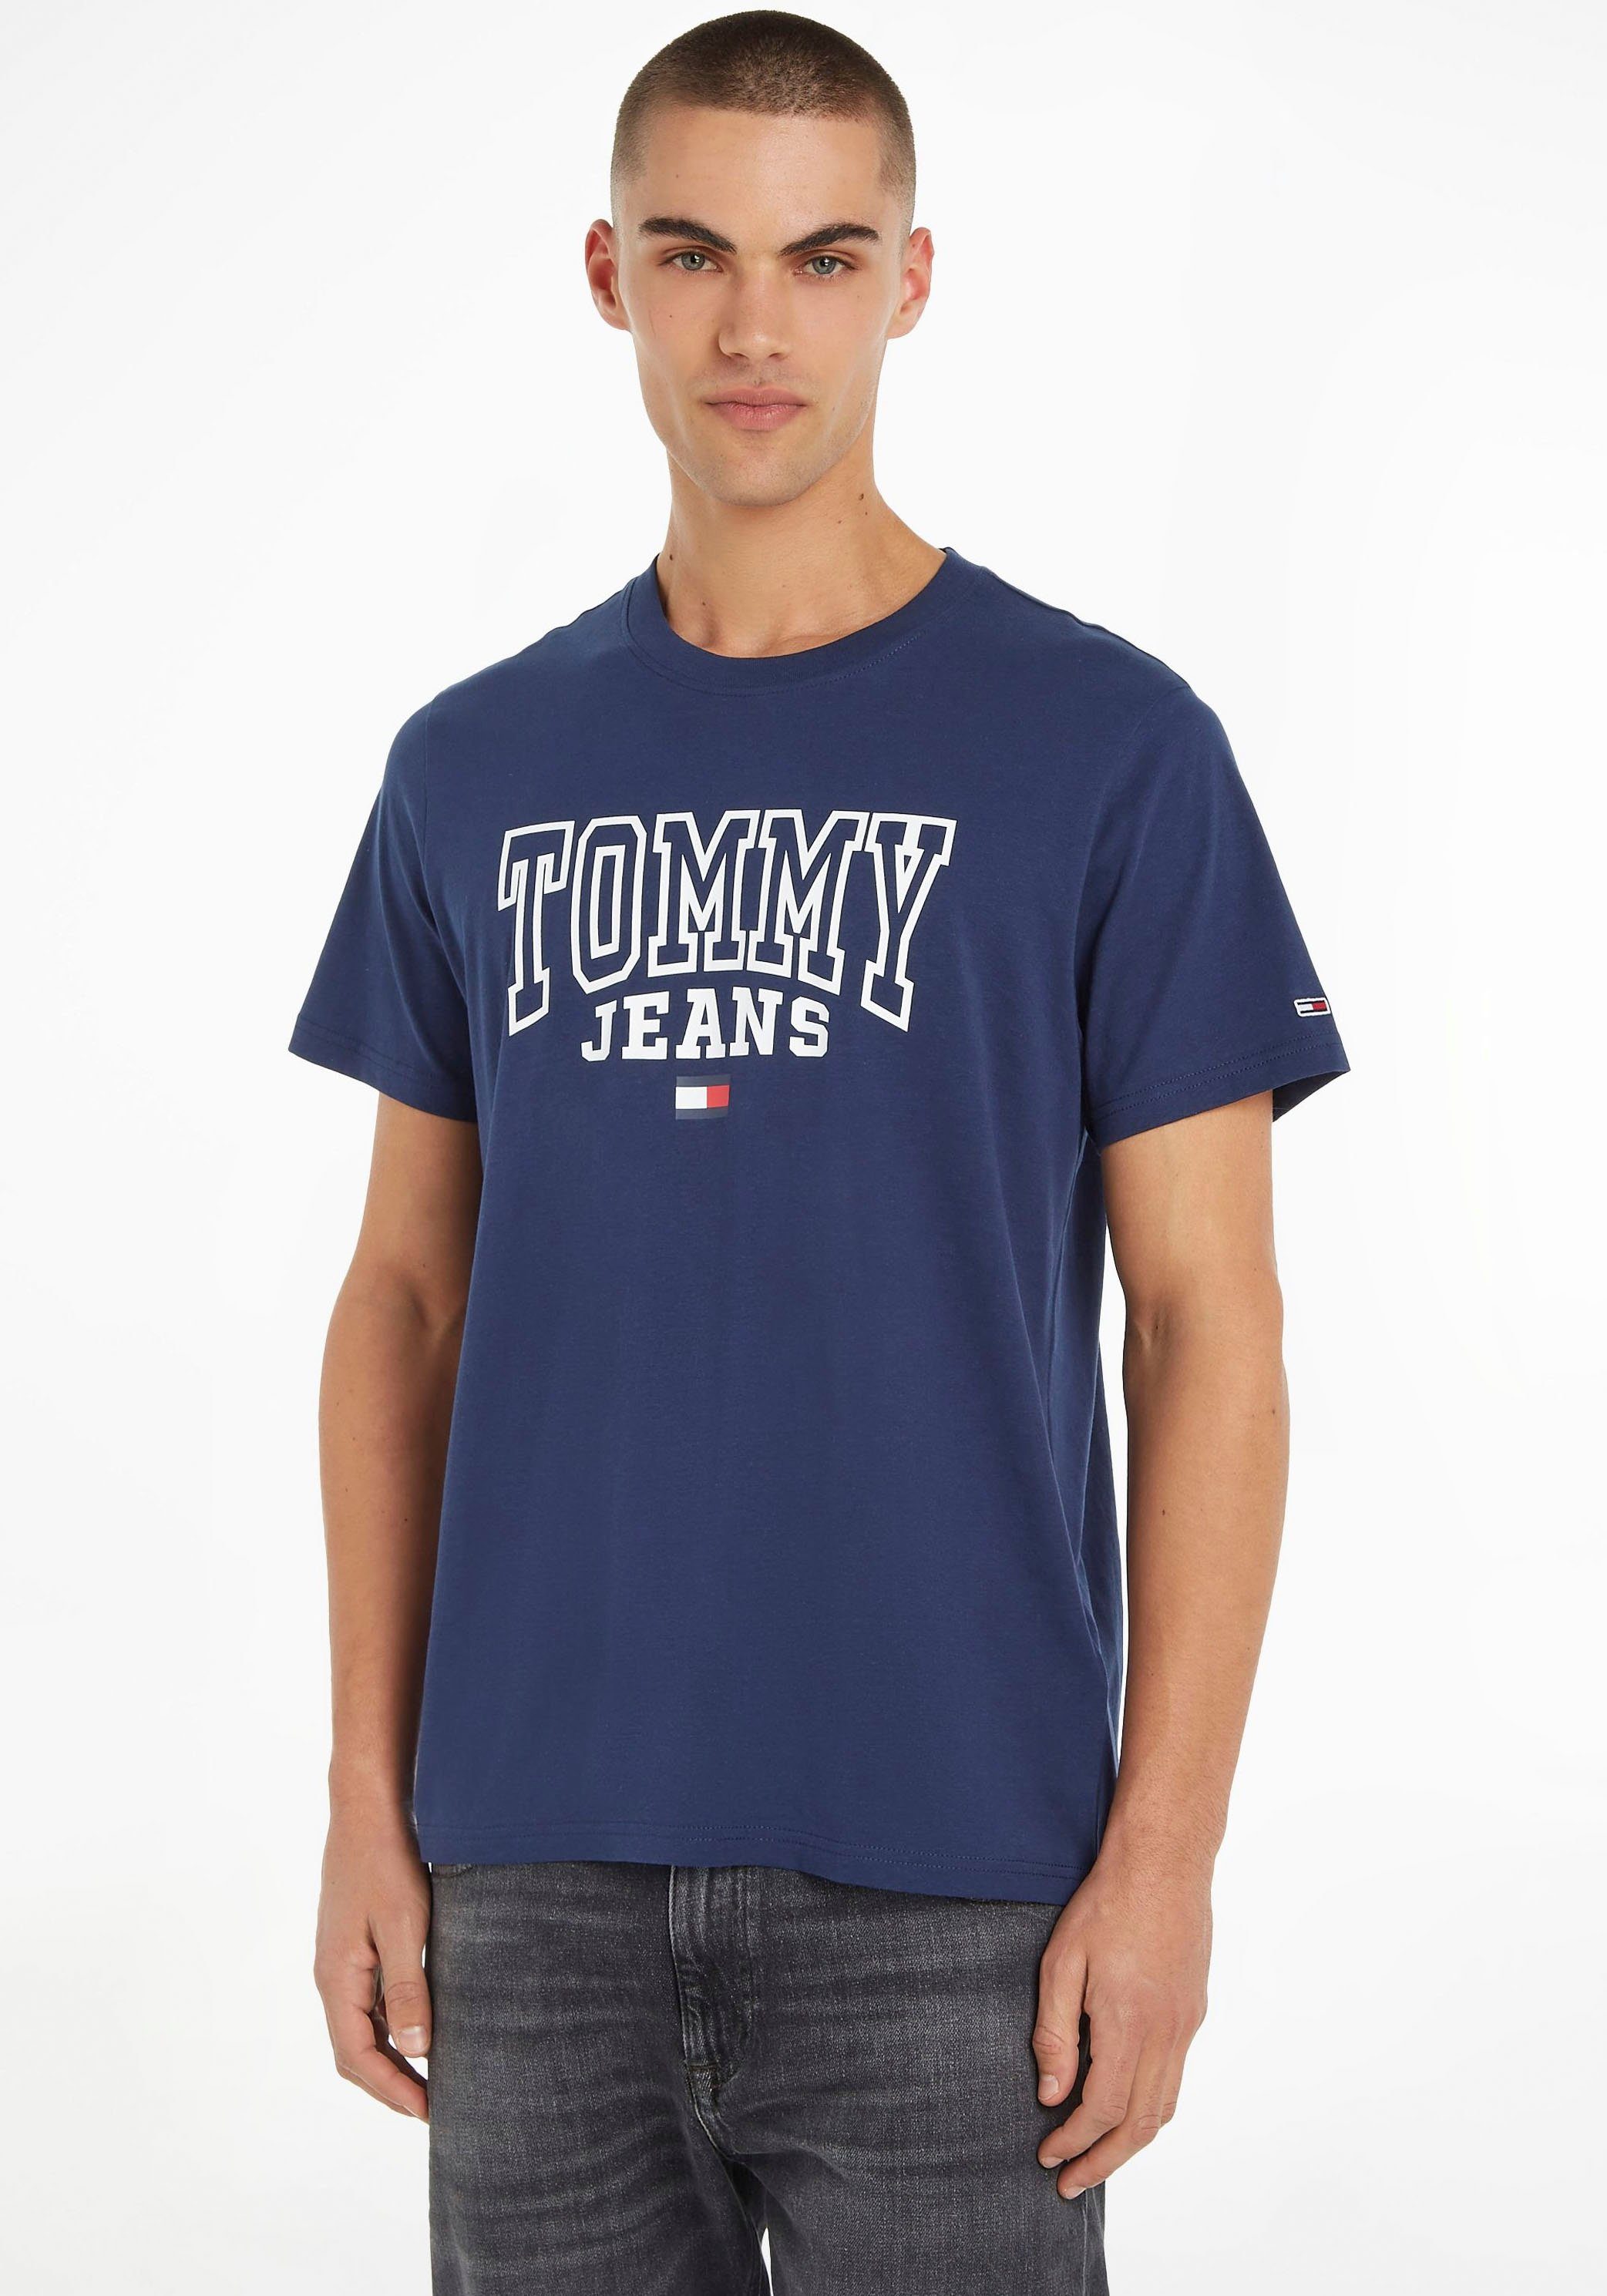 Twilight Navy T-Shirt ENTRY Tommy TJM RGLR Jeans TEE GRAPHIC